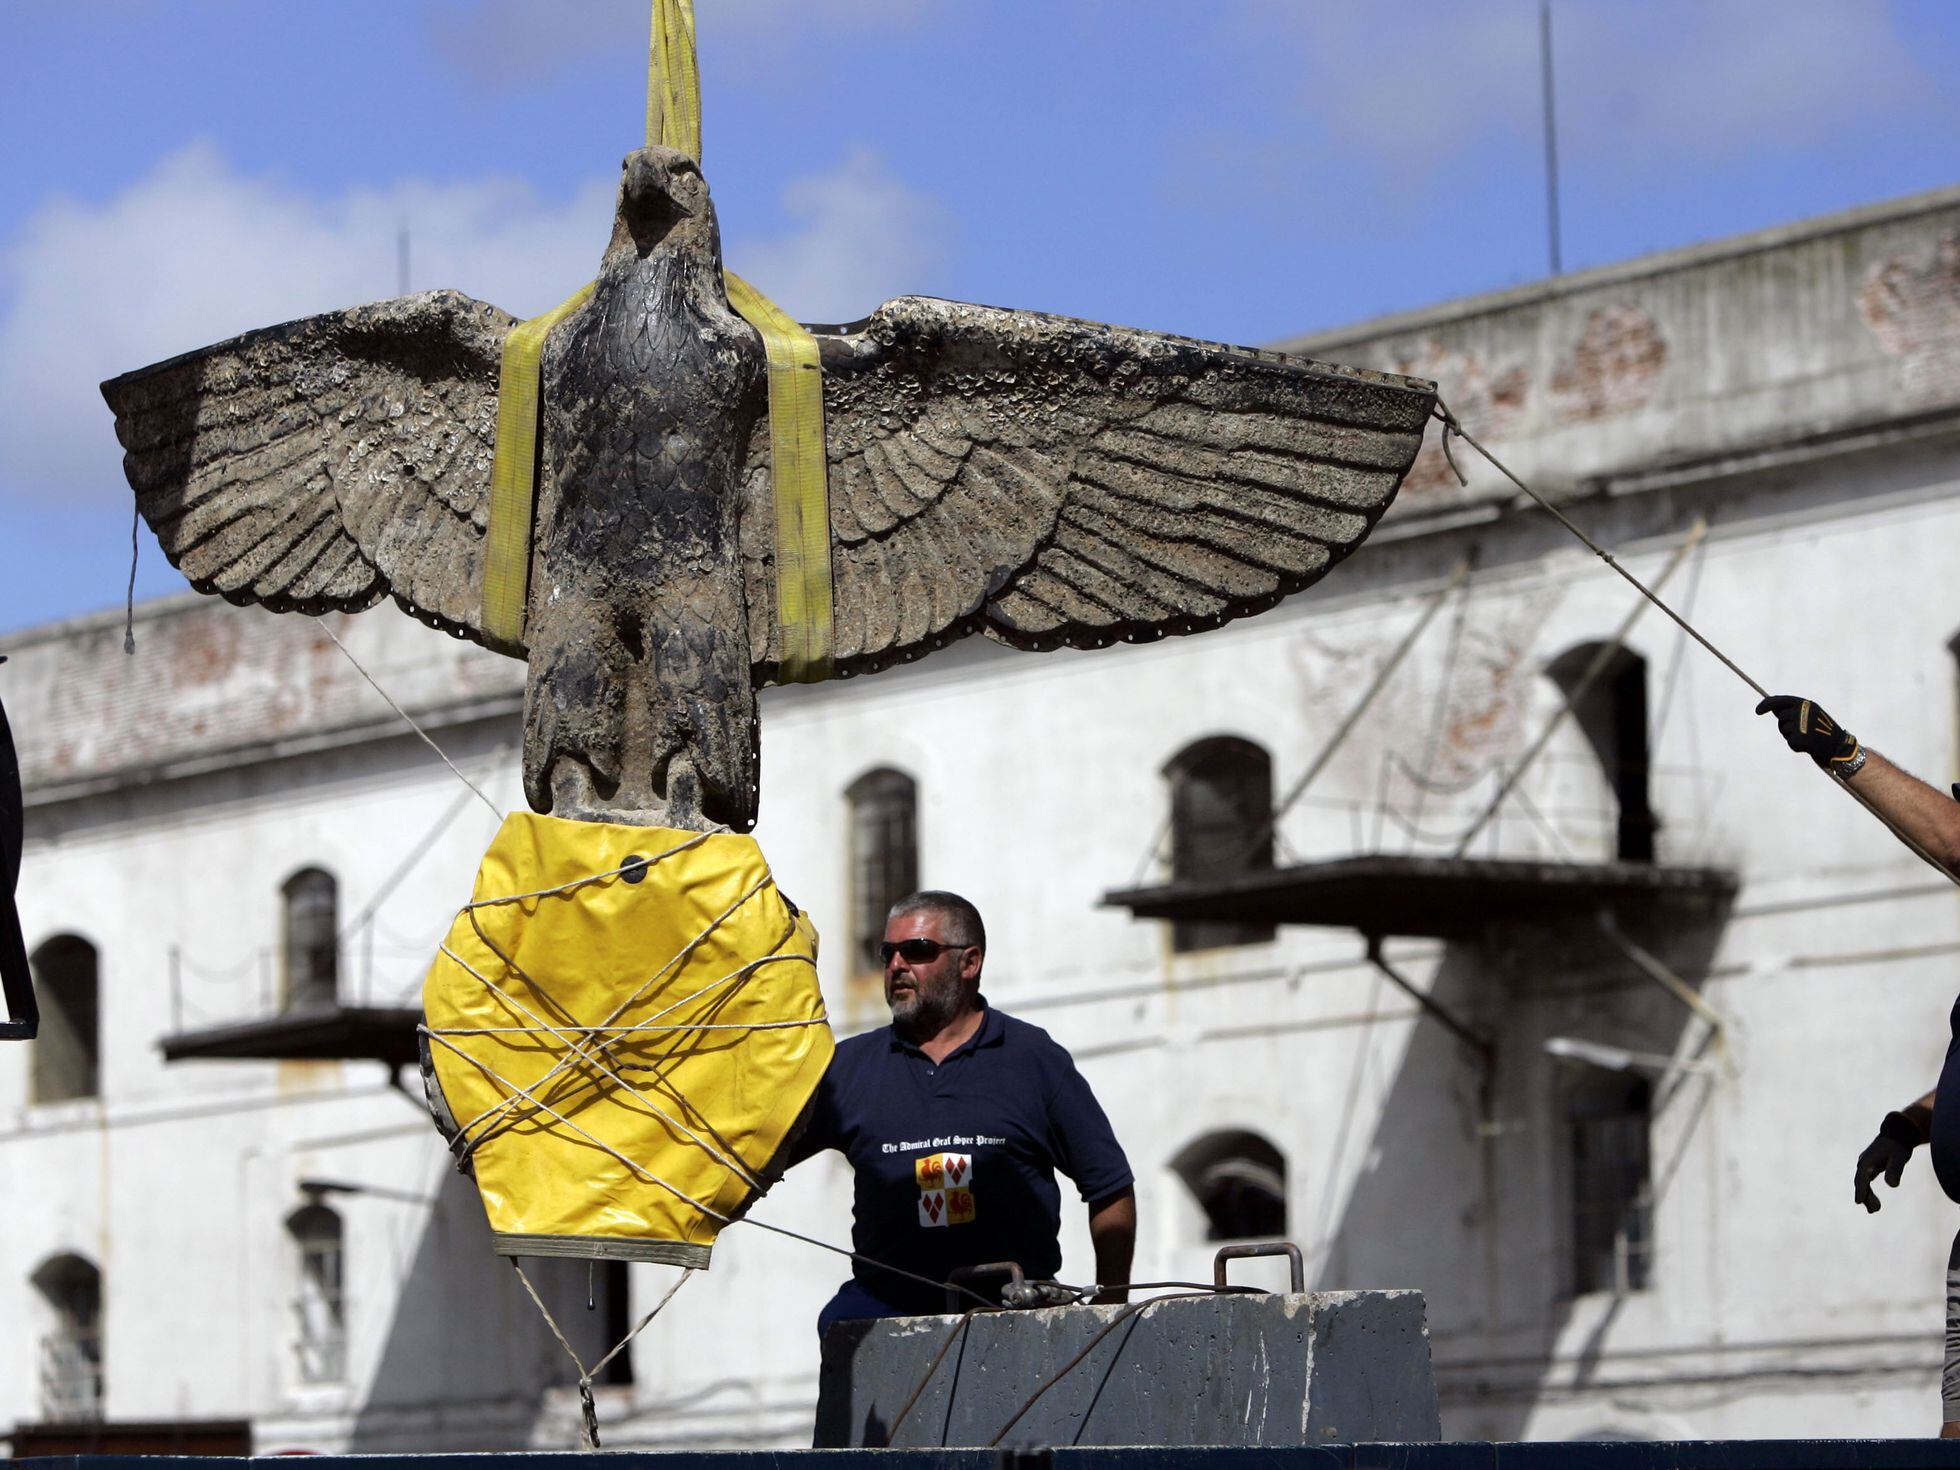 Uruguay debates the fate of a Nazi eagle raised from the wreckage